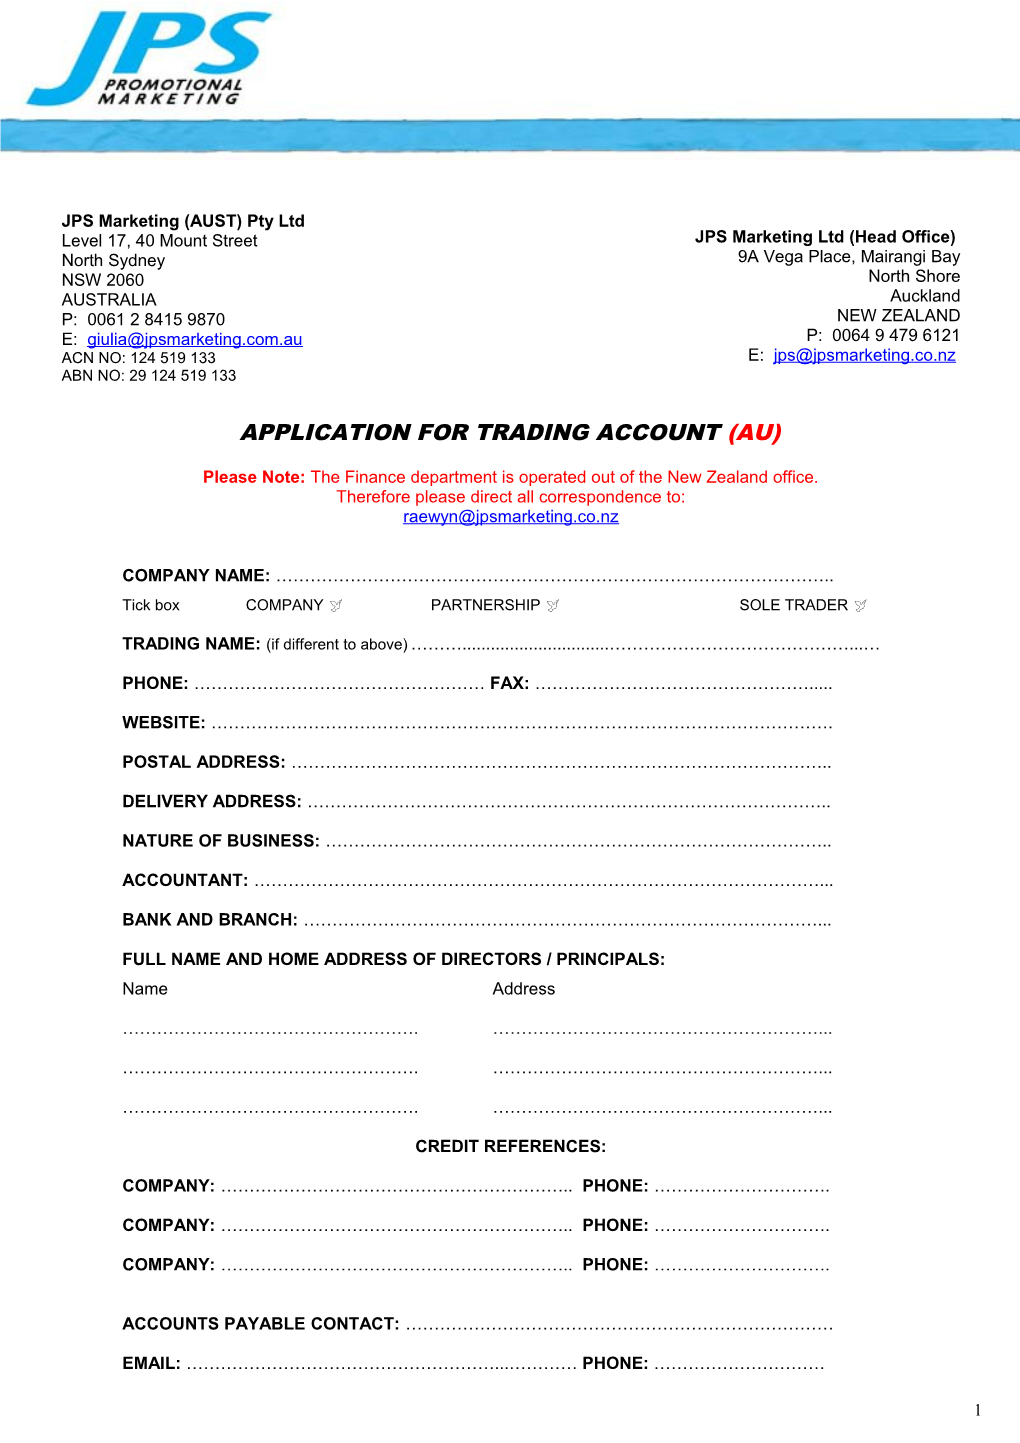 Application for Trading Account